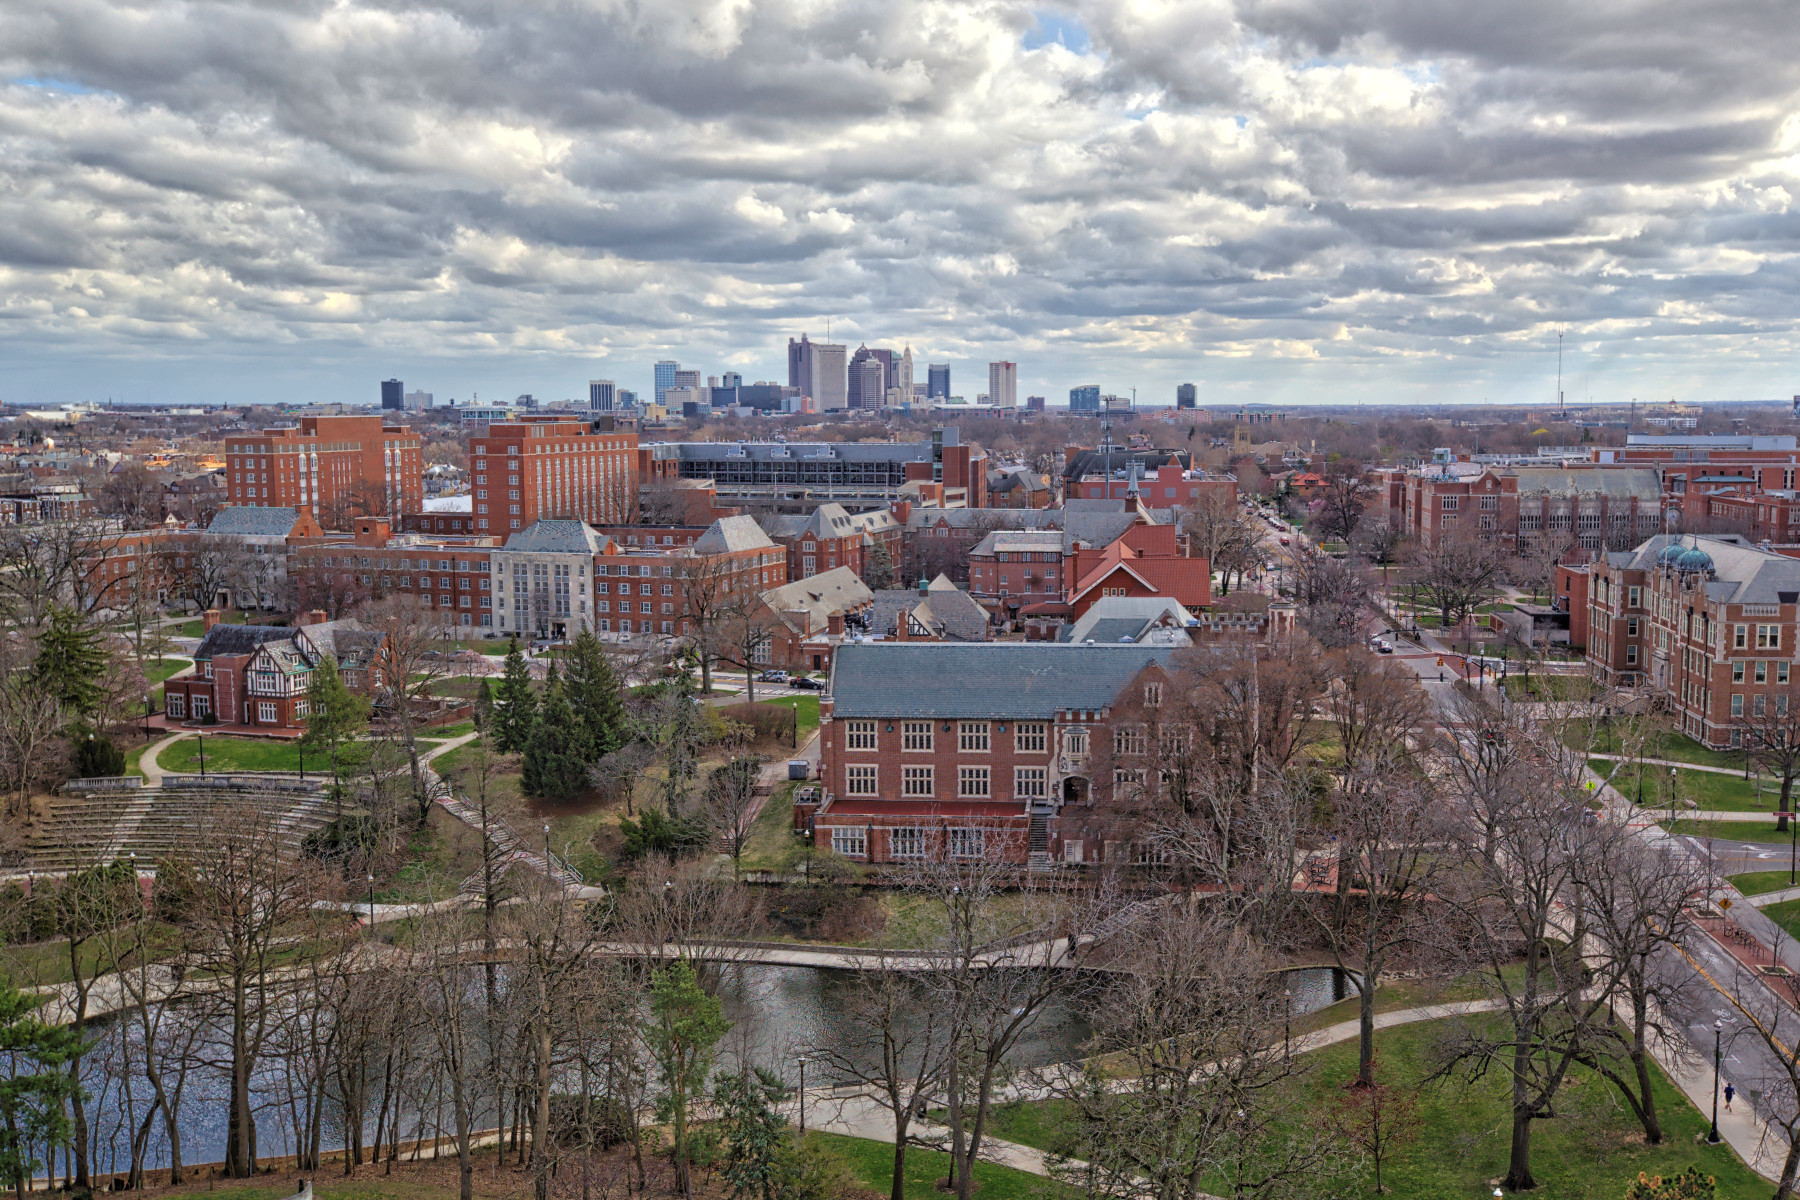 Photograph of the Ohio State campus with the Columbus skyline in the background